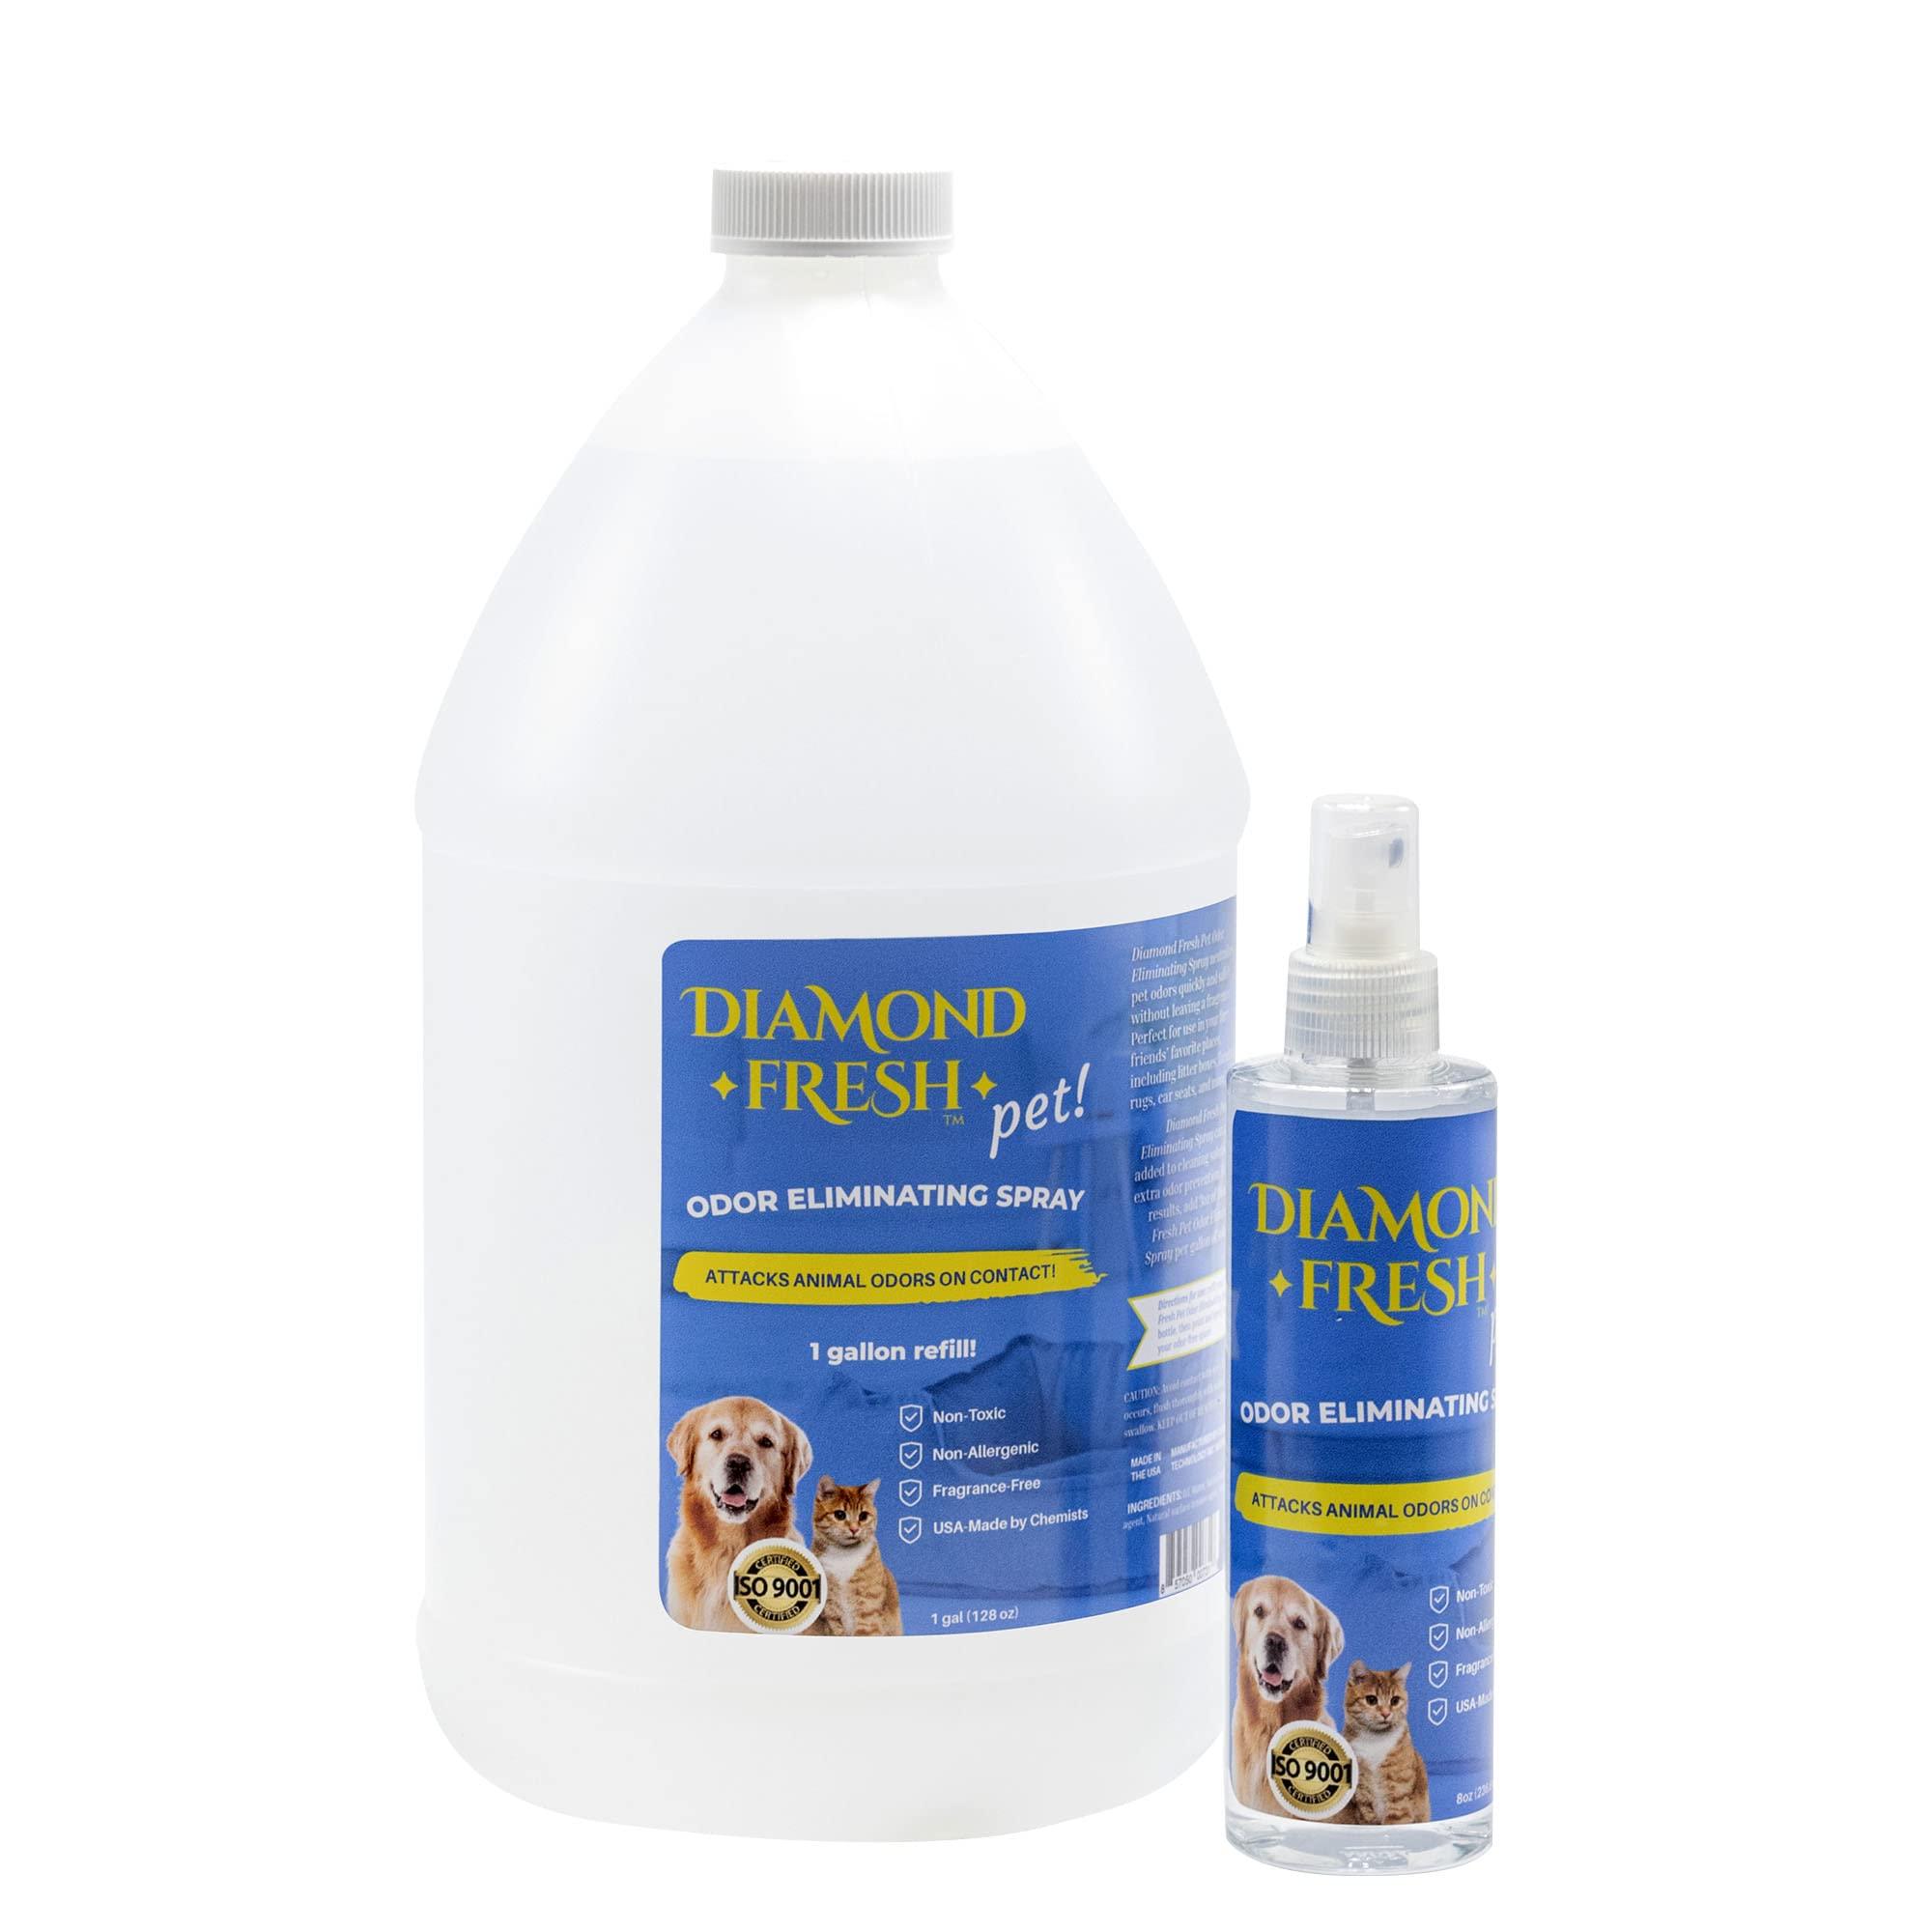 Diamond Fresh Odor Eliminator Spray: New Solution, Scent Free, Fast, Effective Pet Odor Suppressant for Home. Stop Urine Smells from Cats, Dogs, Pets, Premium Formula for Strong Odors 136oz (Gal + Bonus)